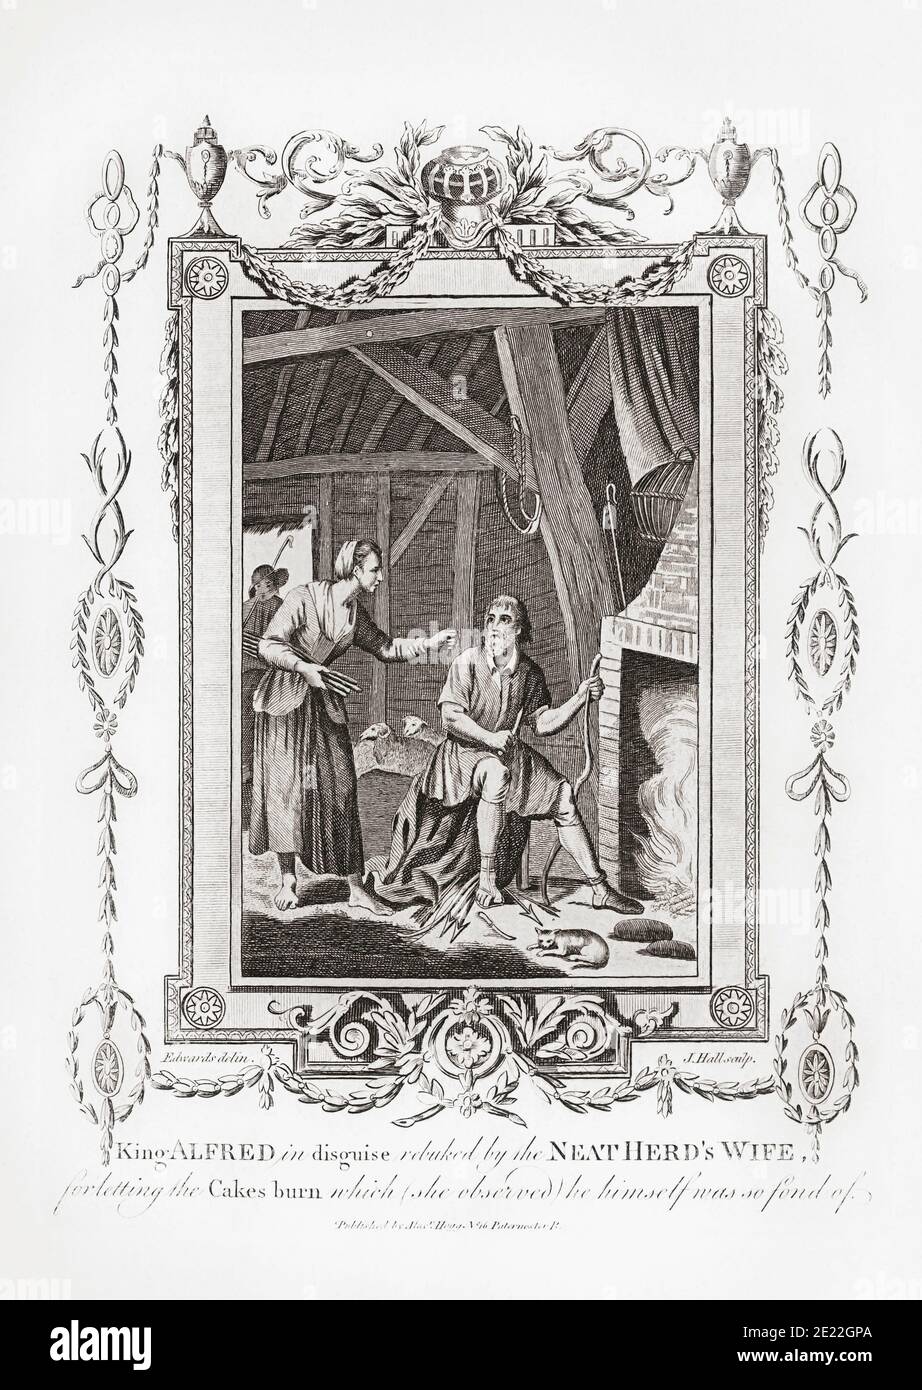 King Alfred the Great burns the cakes and is rebuked by the peasant woman who had given him shelter without knowing who he was.  Alfred the Great, 848/9 - 899, king of the Anglo-Saxons.  Engraving from The New, Impartial and Complete History of England by Edward Barnard, published in London 1783. Stock Photo